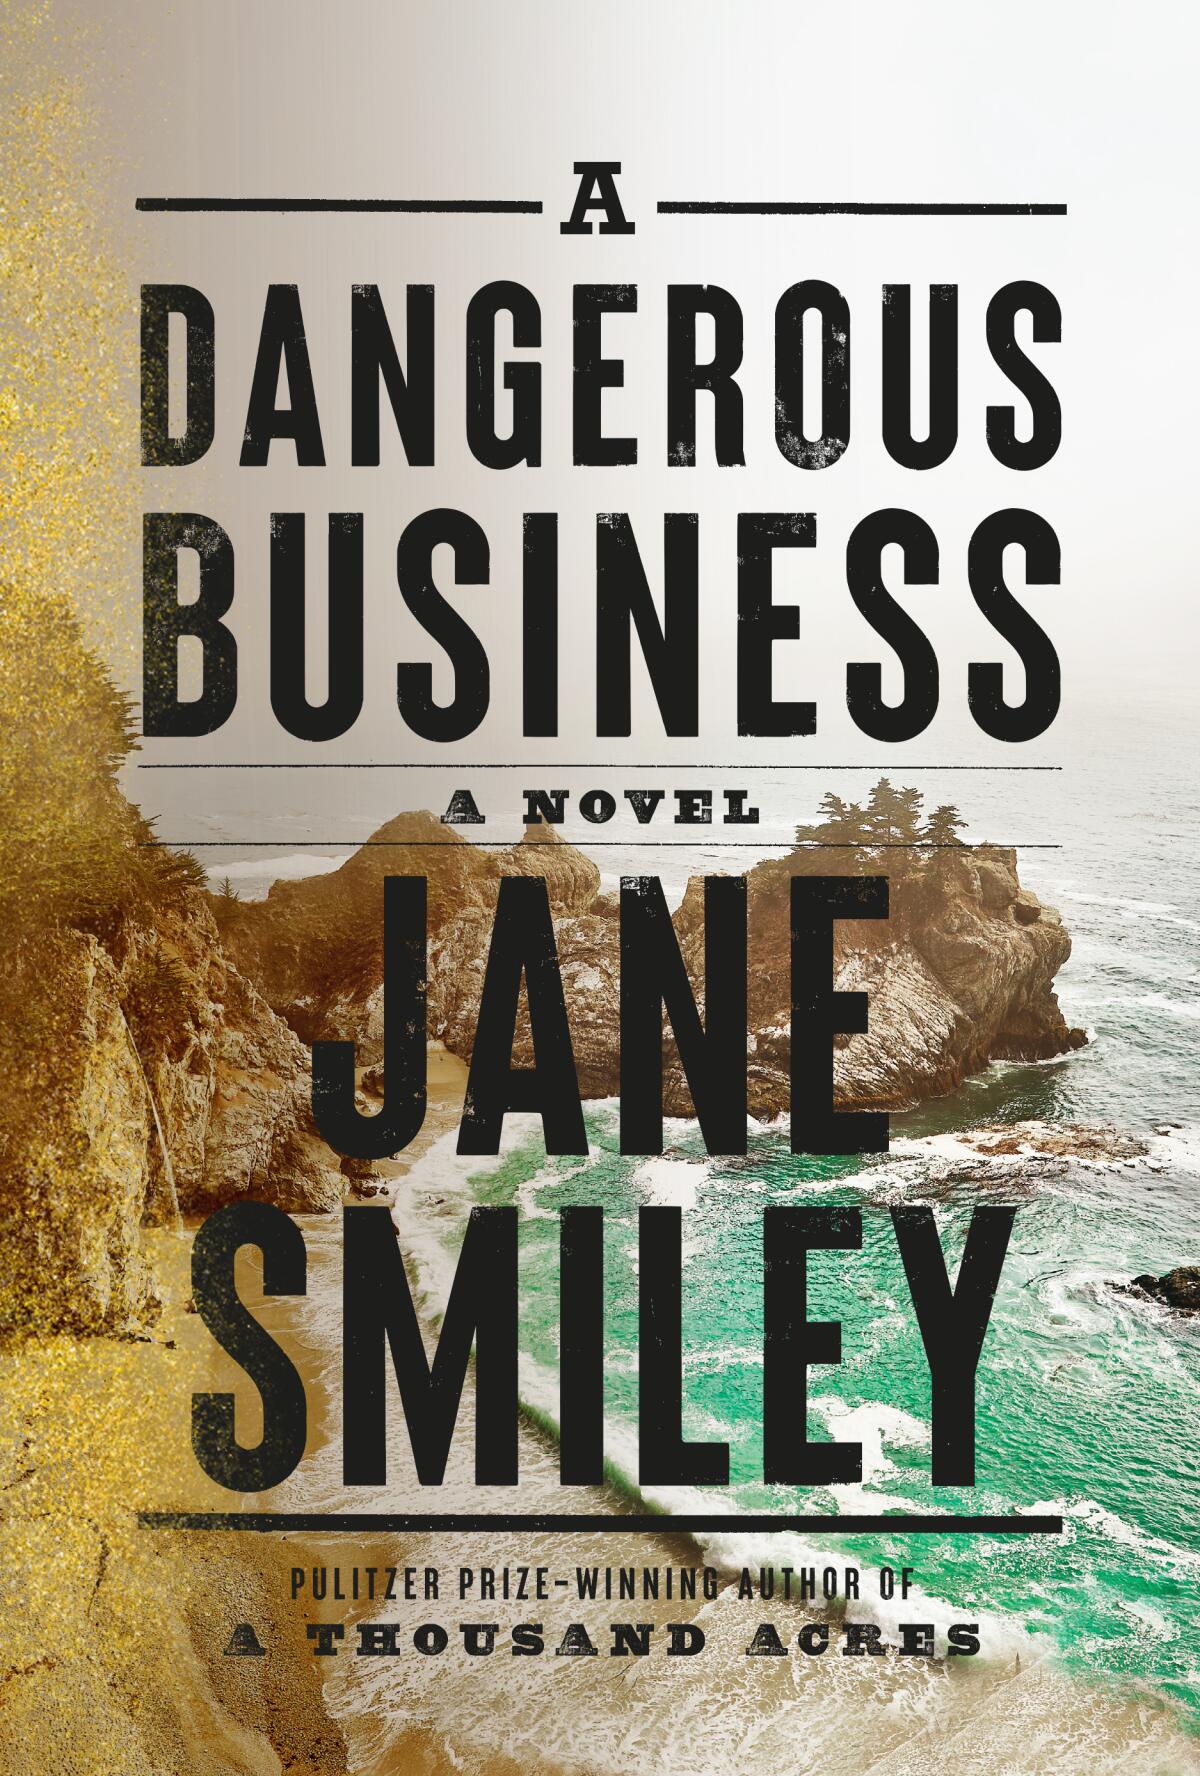 Cover of 'A Dangerous Business,' by Jane Smiley